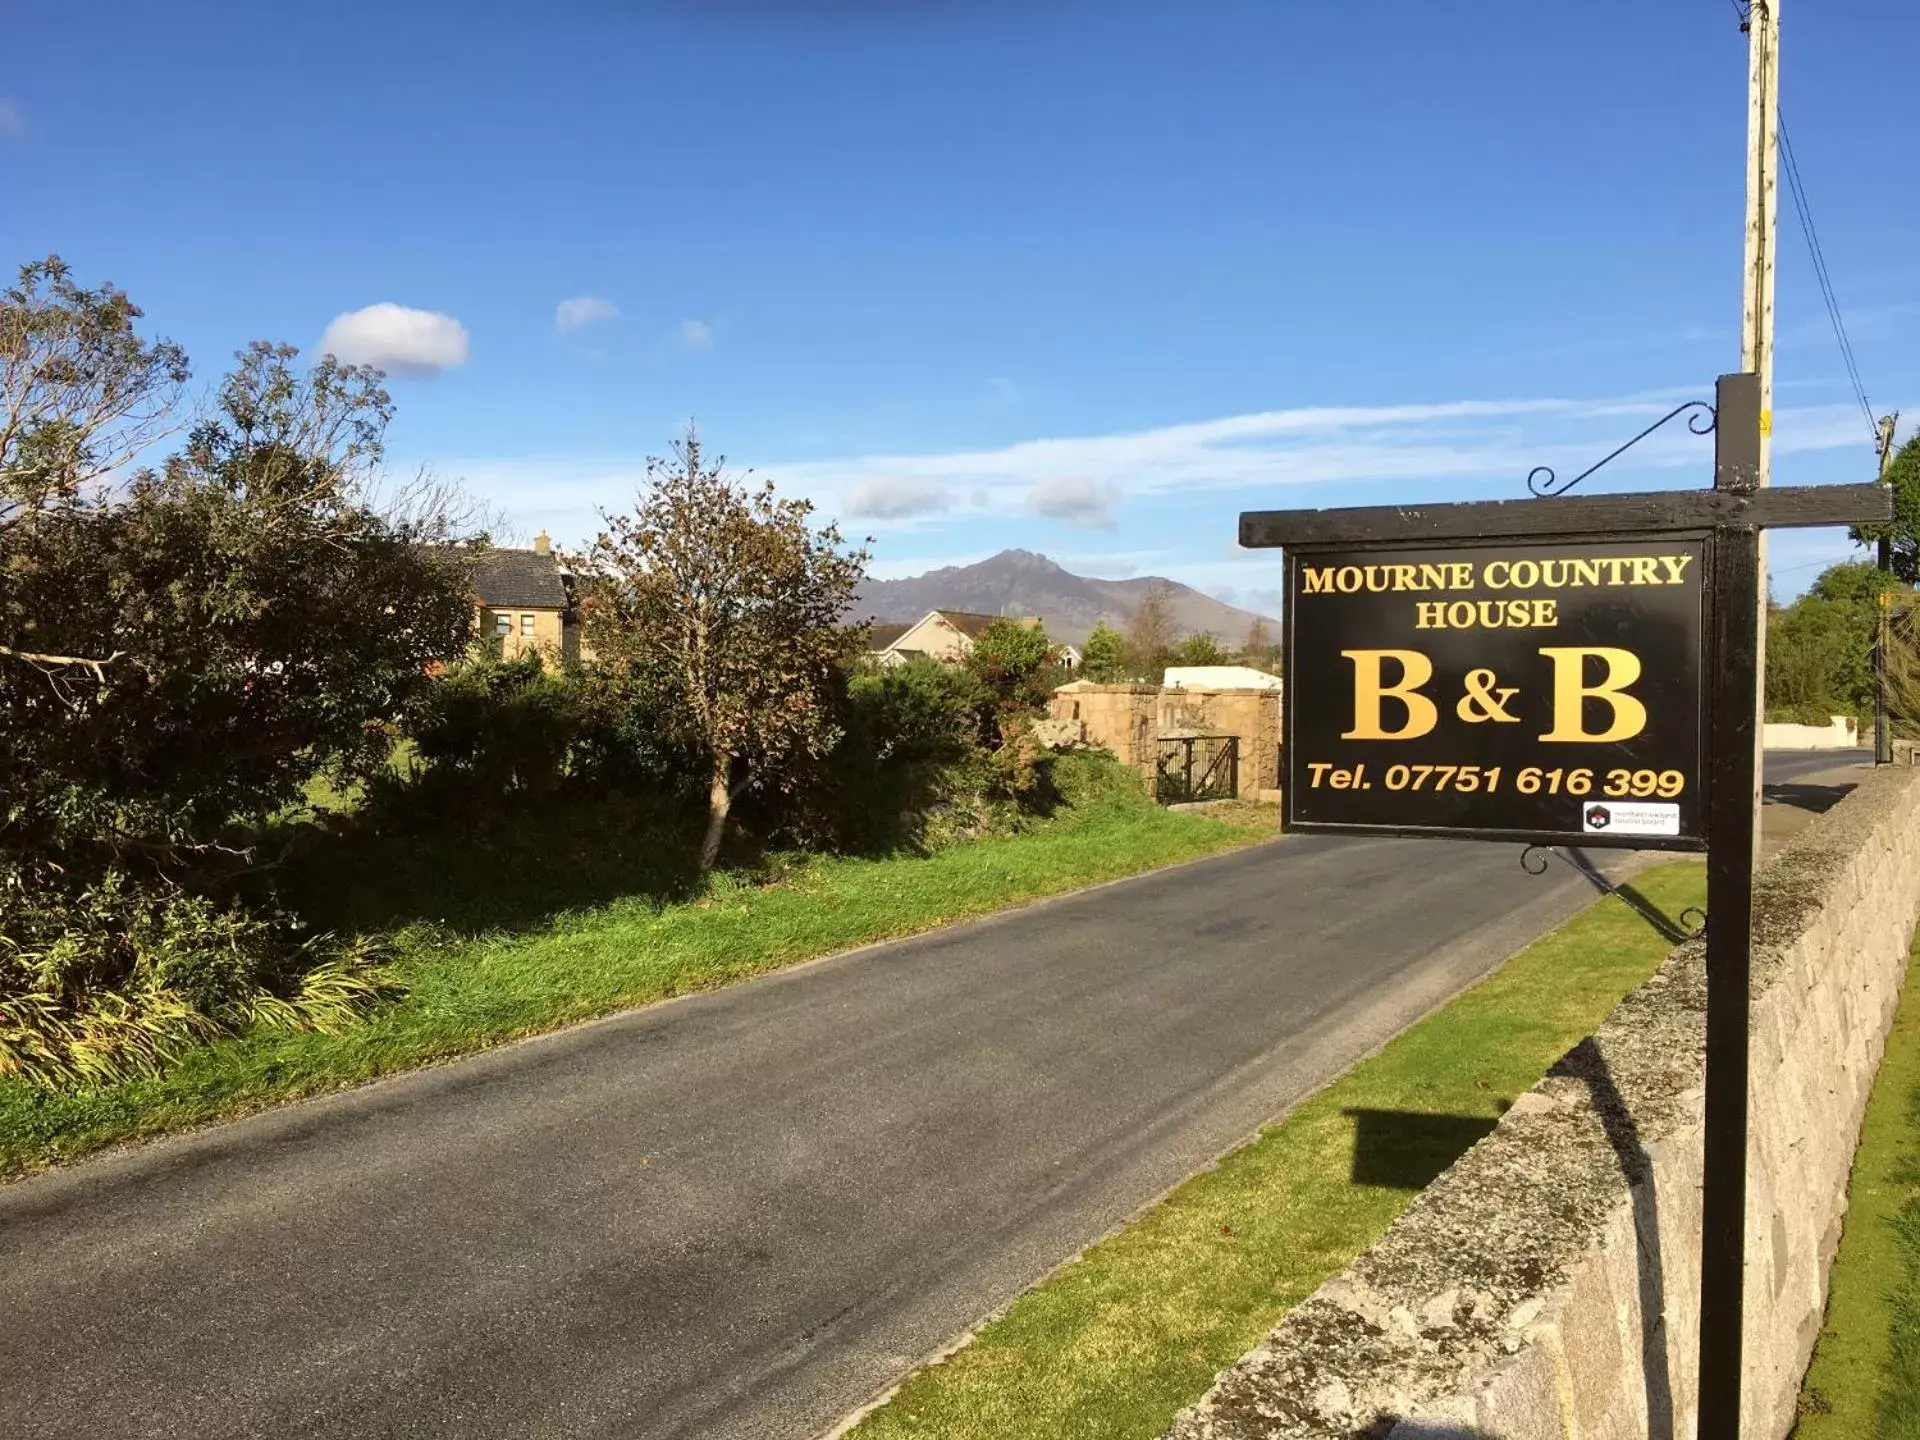 Property building in Mourne Country House Bed and Breakfast